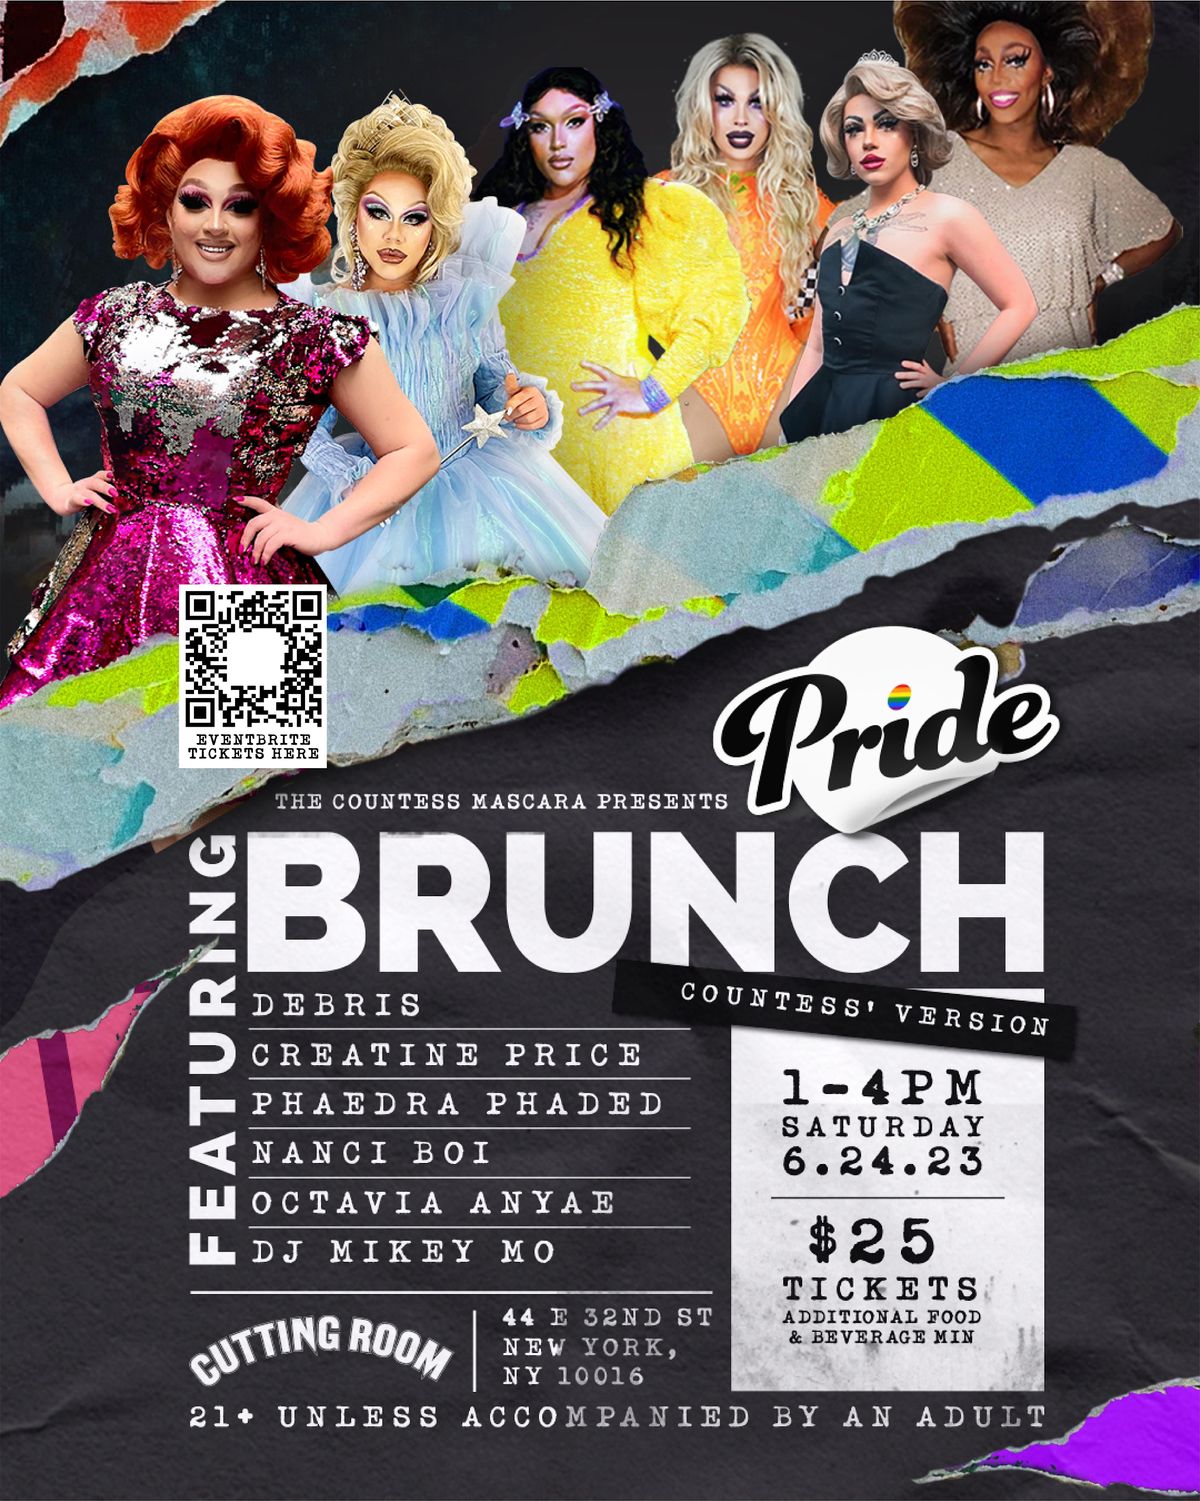 Pride Brunch (Countess' Version) @ The Cutting Room